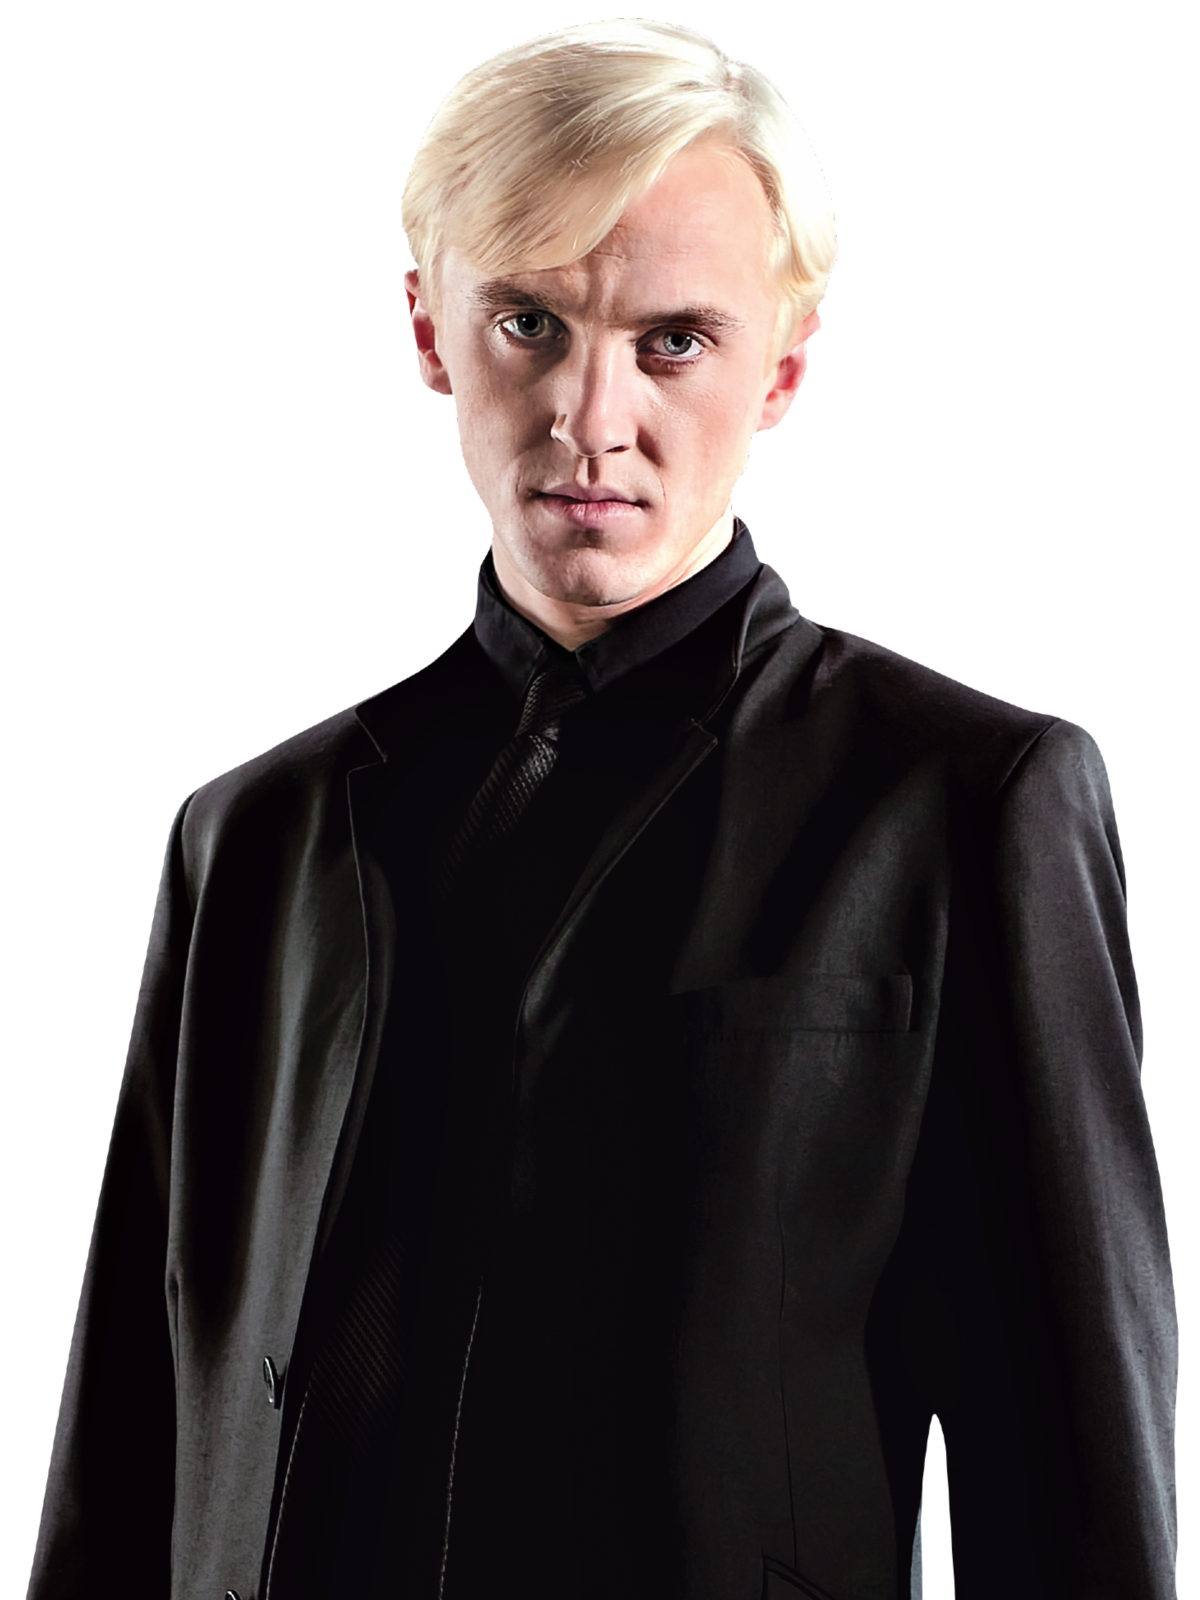 Draco Malfoy: The Complex Antagonist in Harry Potter